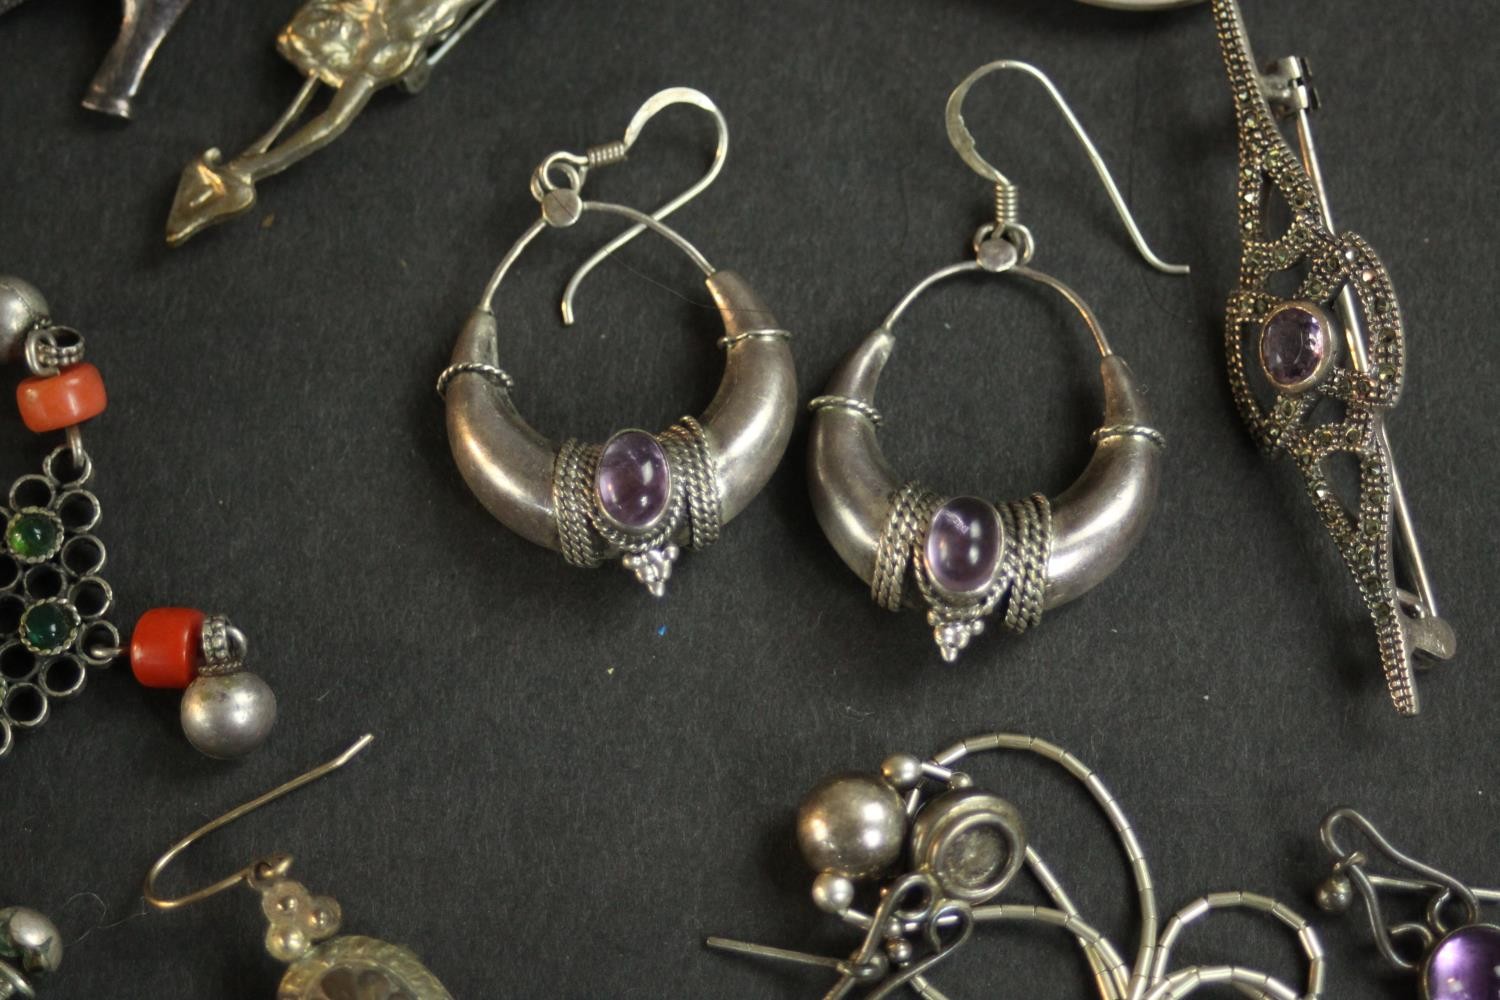 A large collection of silver and gemset jewellery, including amethyst and silver earrings, a pair of - Image 4 of 8